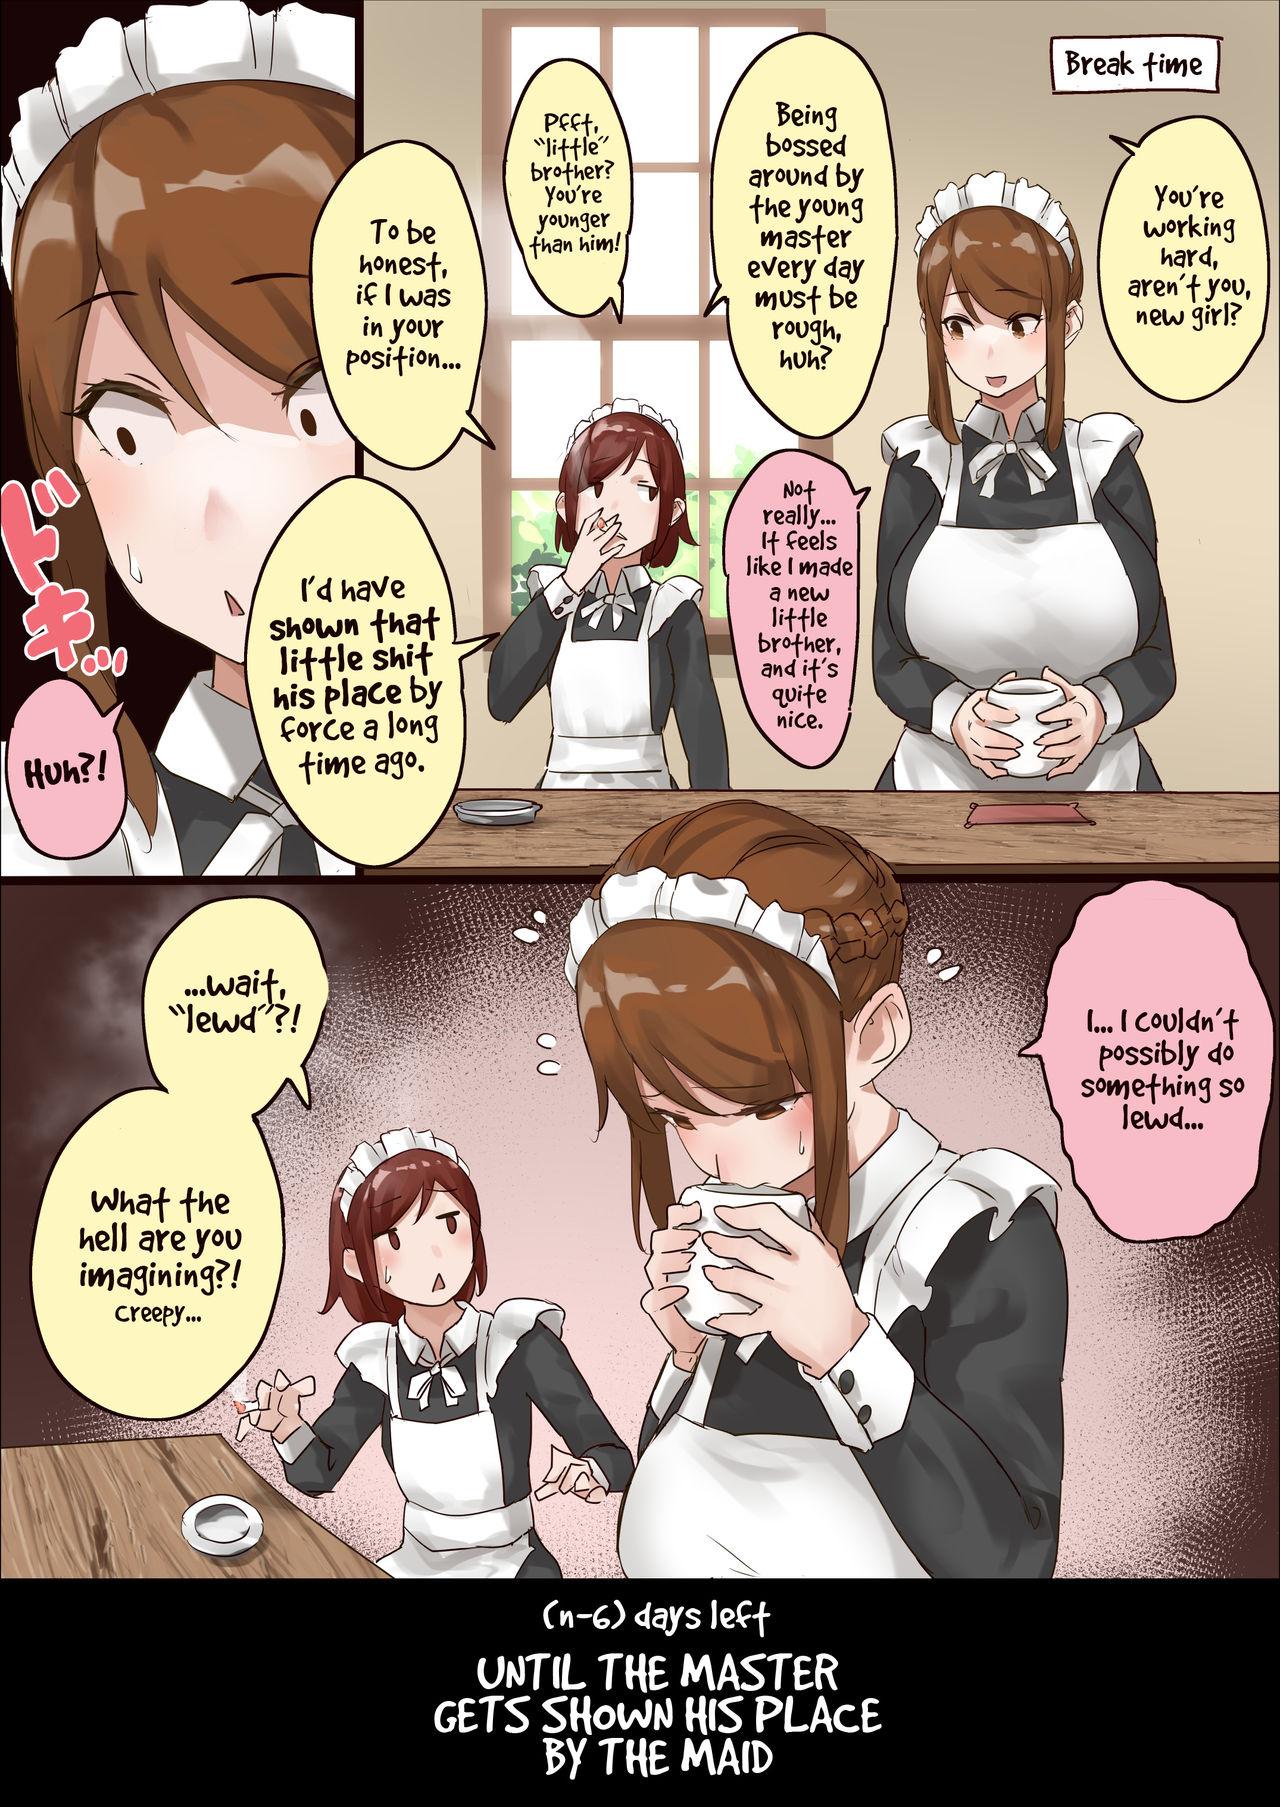 Blackdick master and maid - Original Massages - Page 7